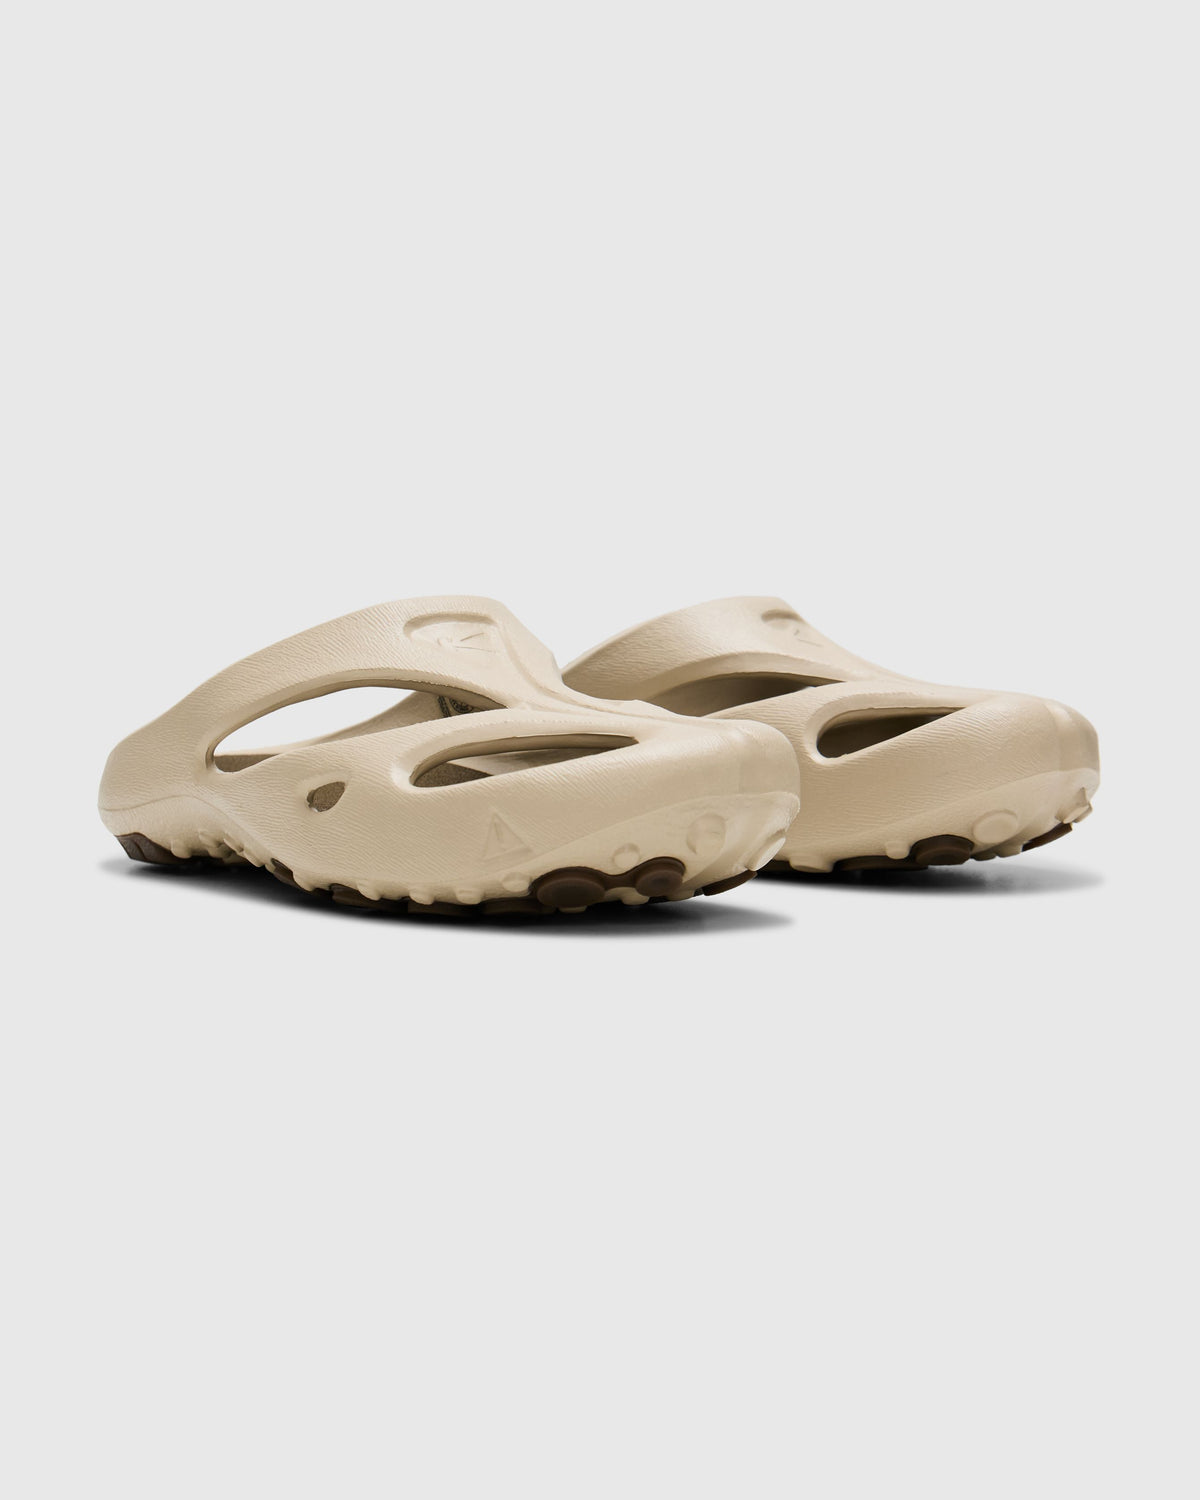 Shanti Clog in Plaza Taupe/Canteen